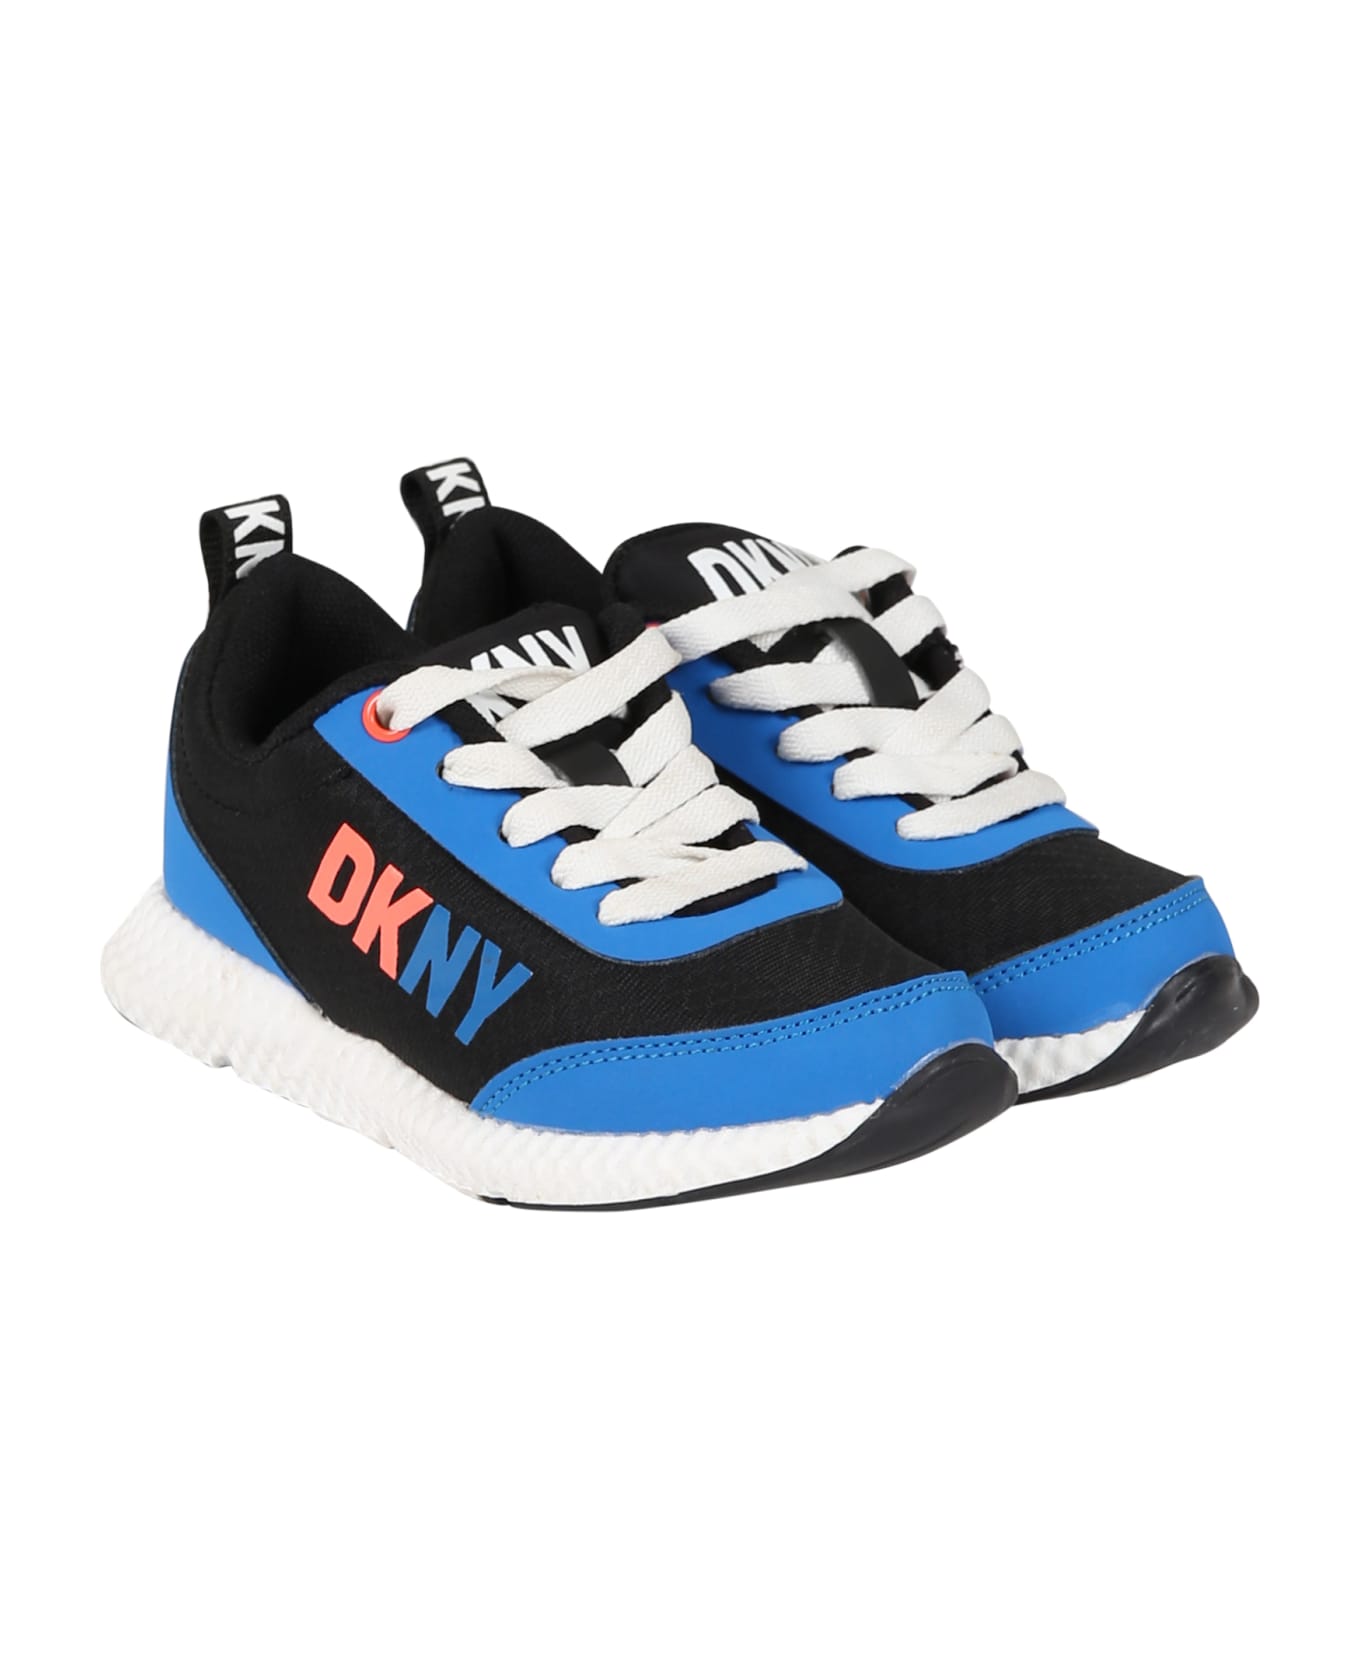 DKNY Multicolor Sneakers For Kids With Logo - Multicolor